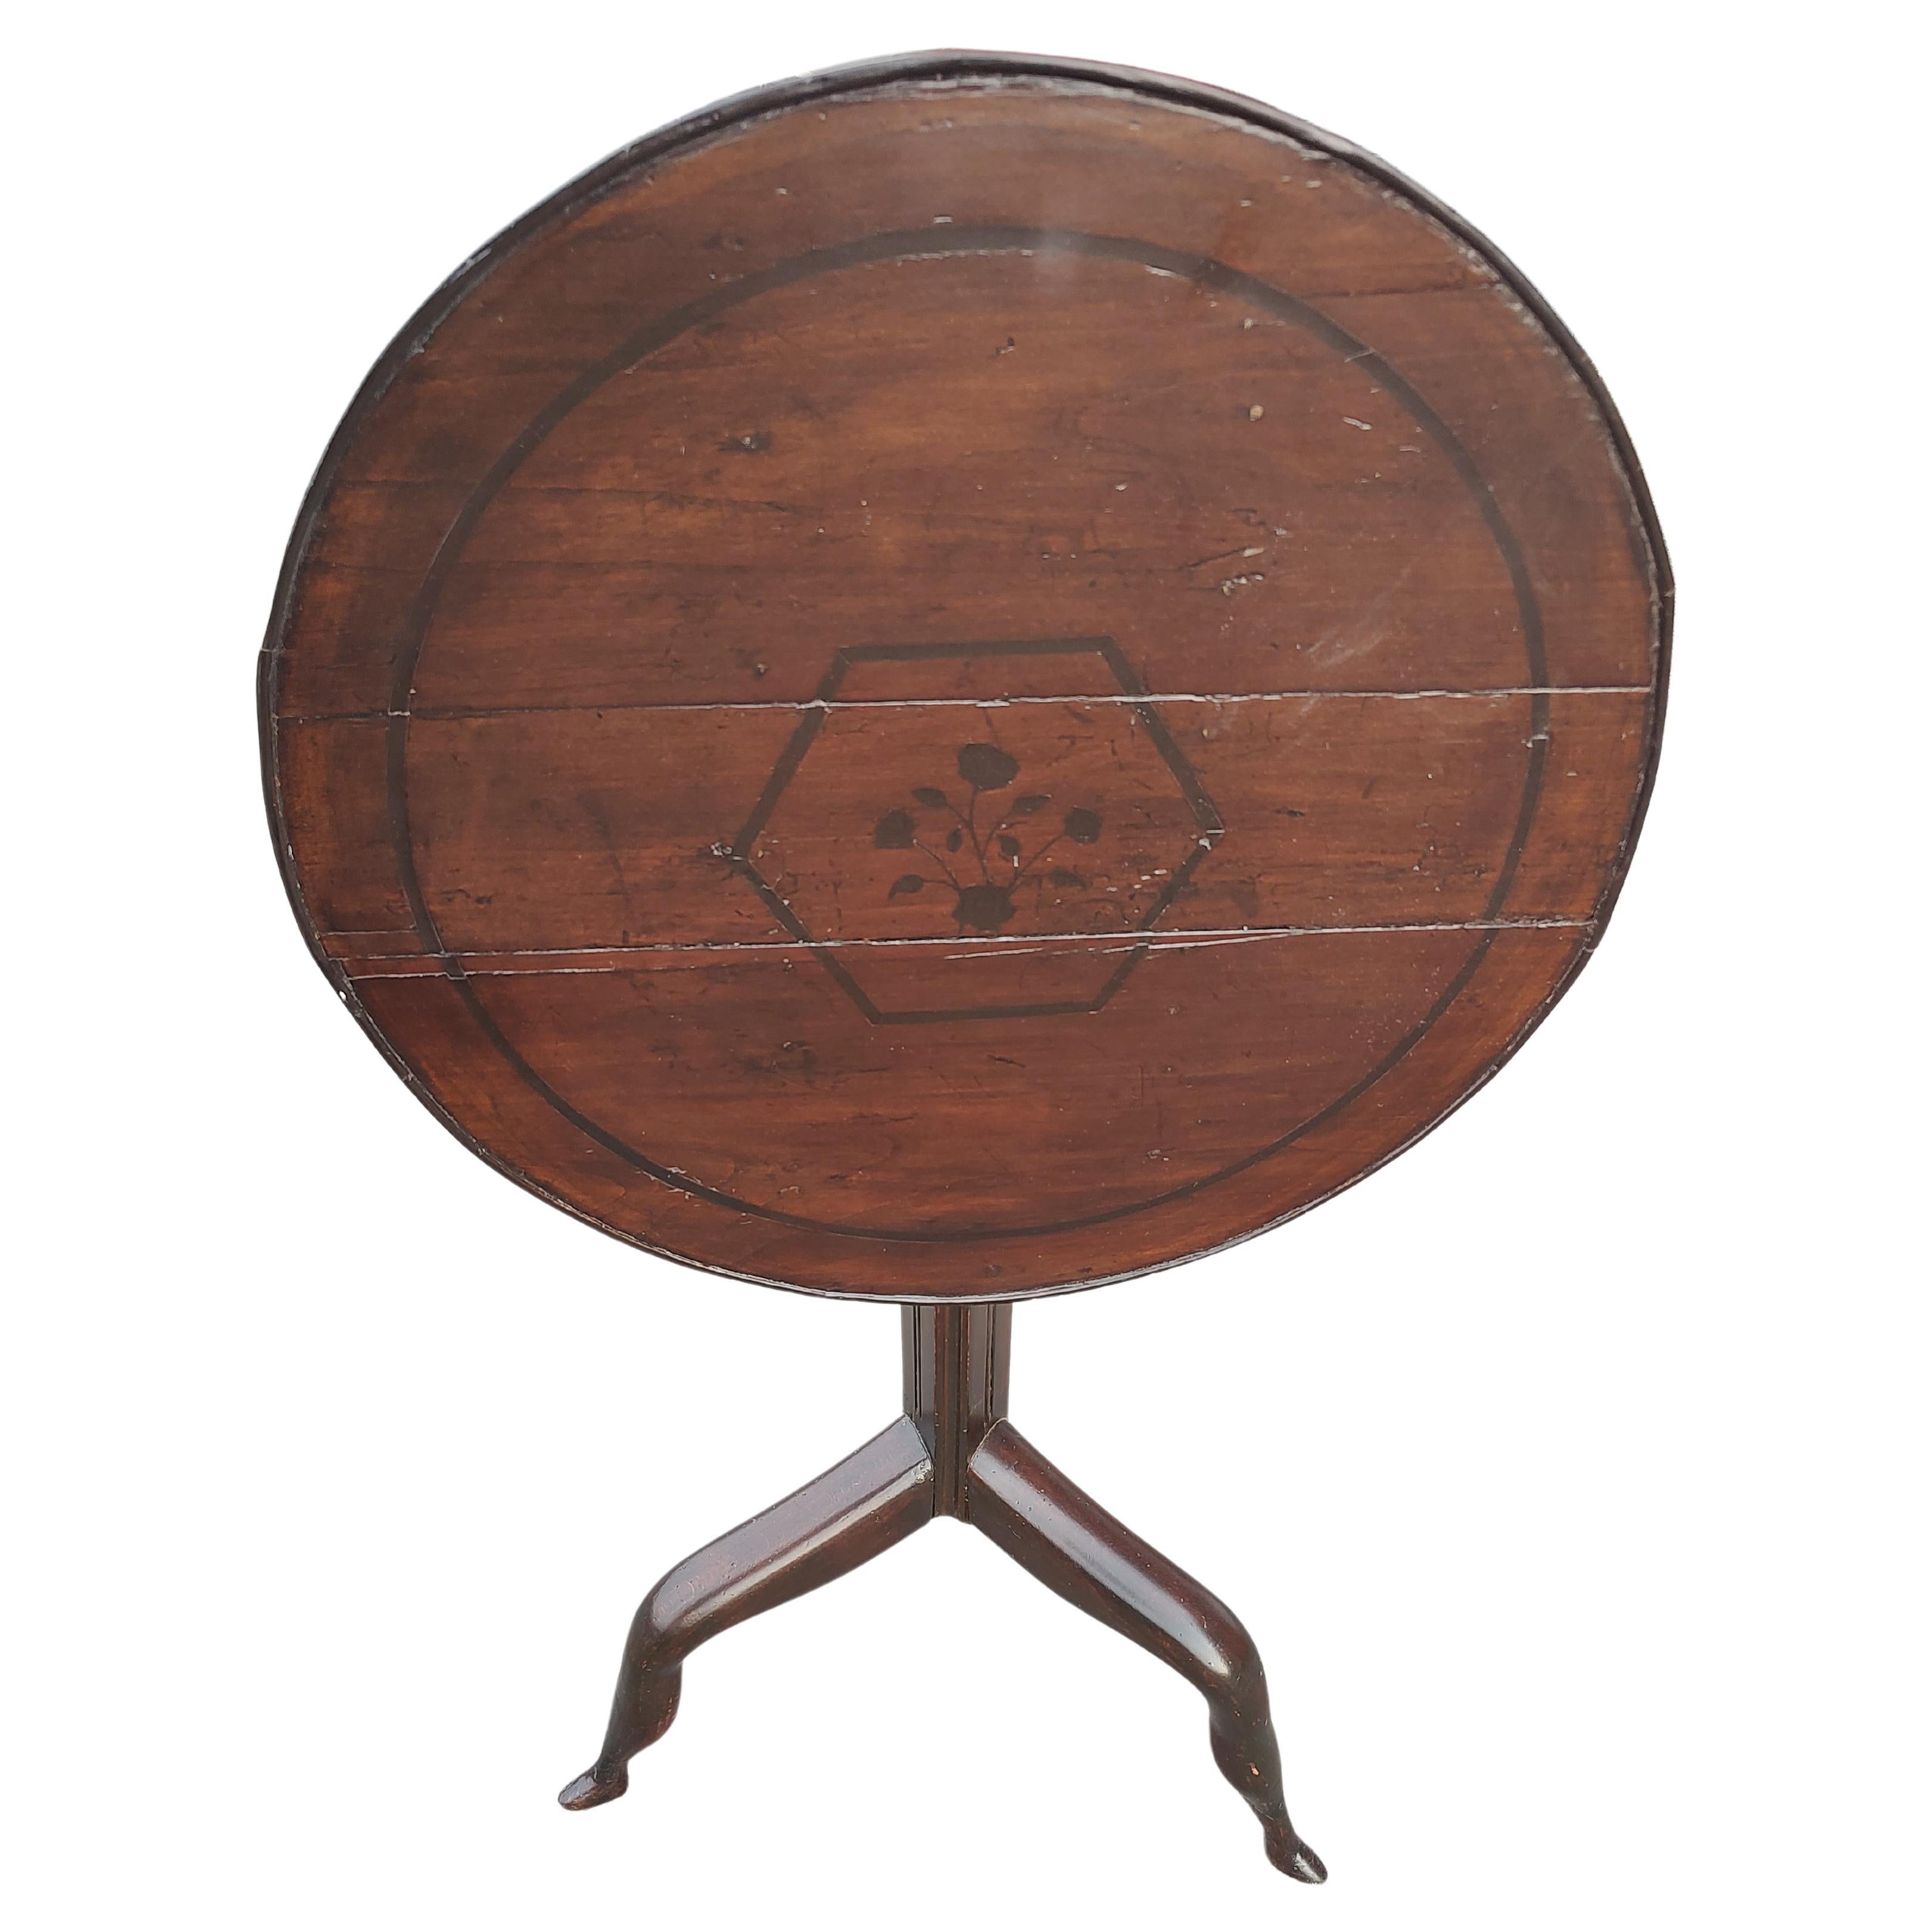 Neoclassical 19thC Tilt Top Table with Birdcage & Shoe Feet and a Discreet Inlay Board Top For Sale